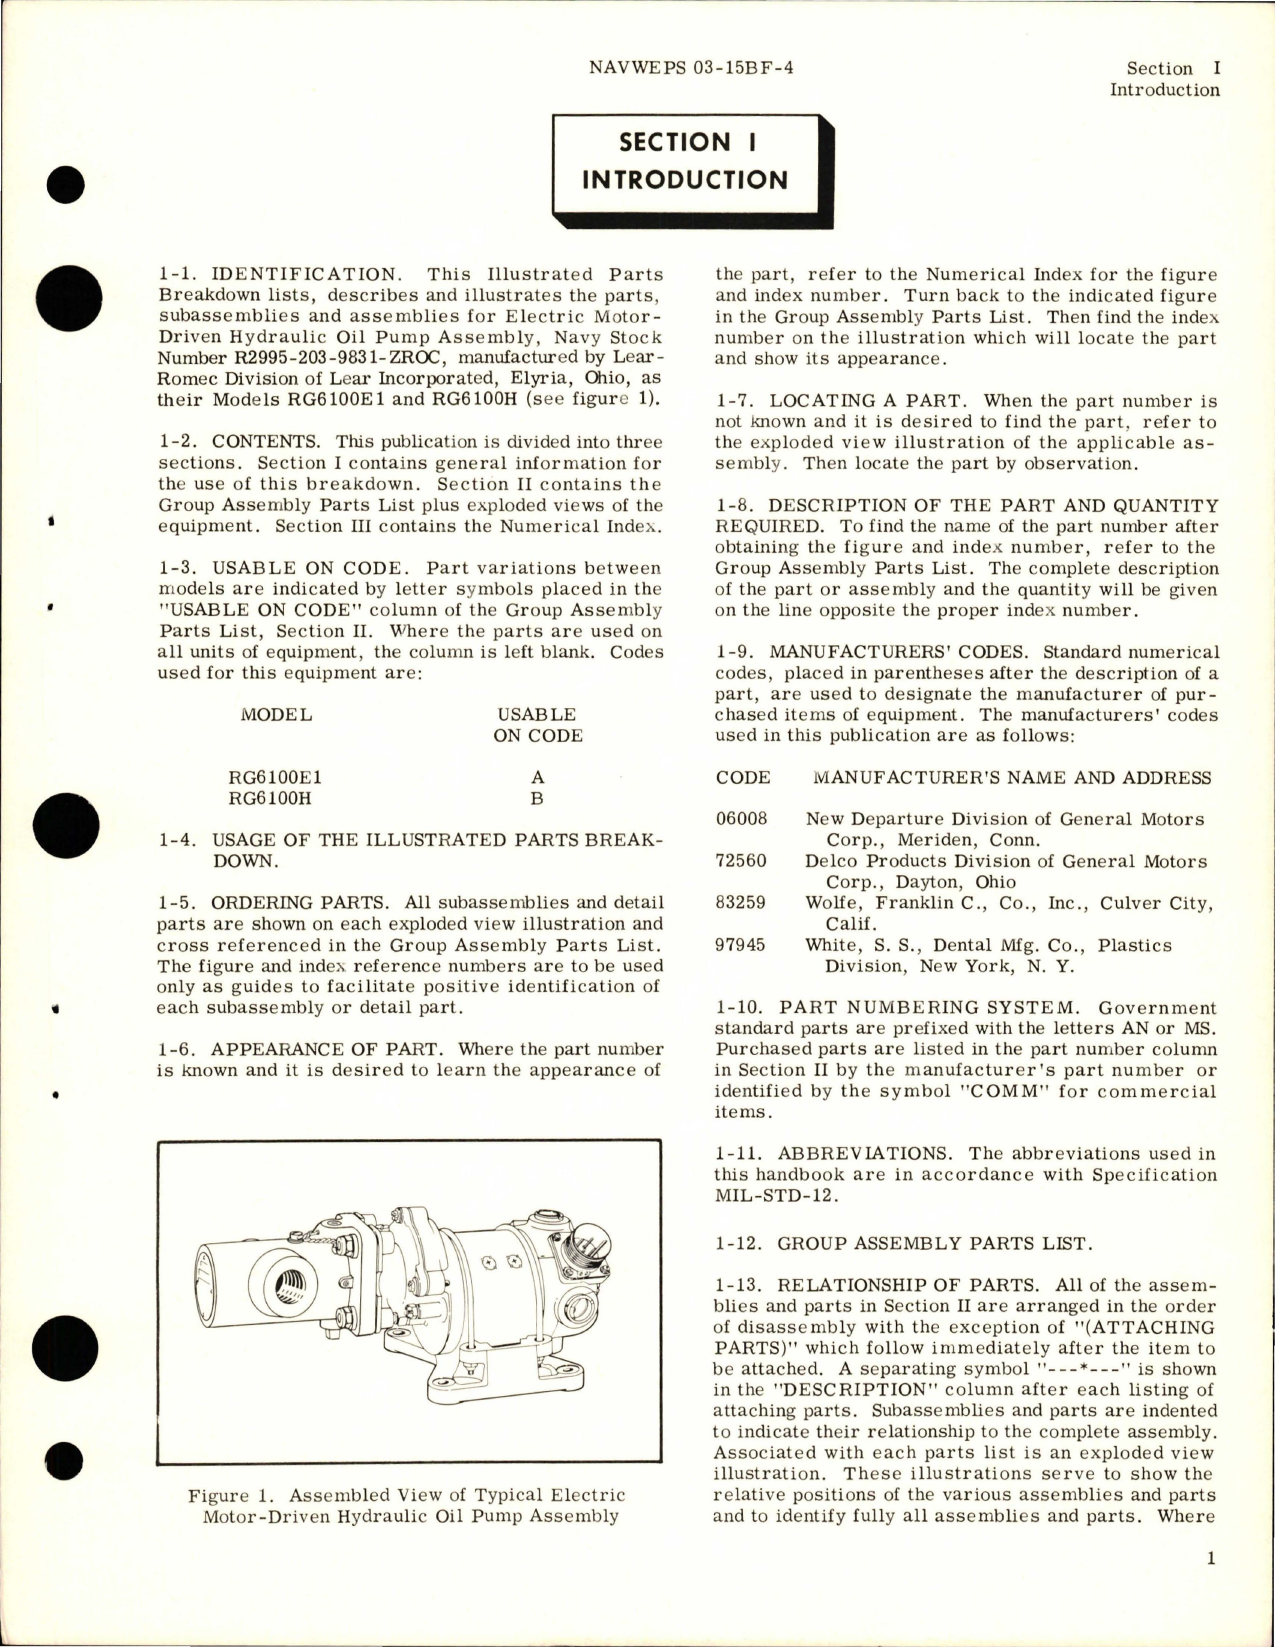 Sample page 5 from AirCorps Library document: Illustrated  Parts Breakdown for Electric Motor-Driven Hydraulic Oil Pump Assembly - Parts RG6100E1 and RG6100H